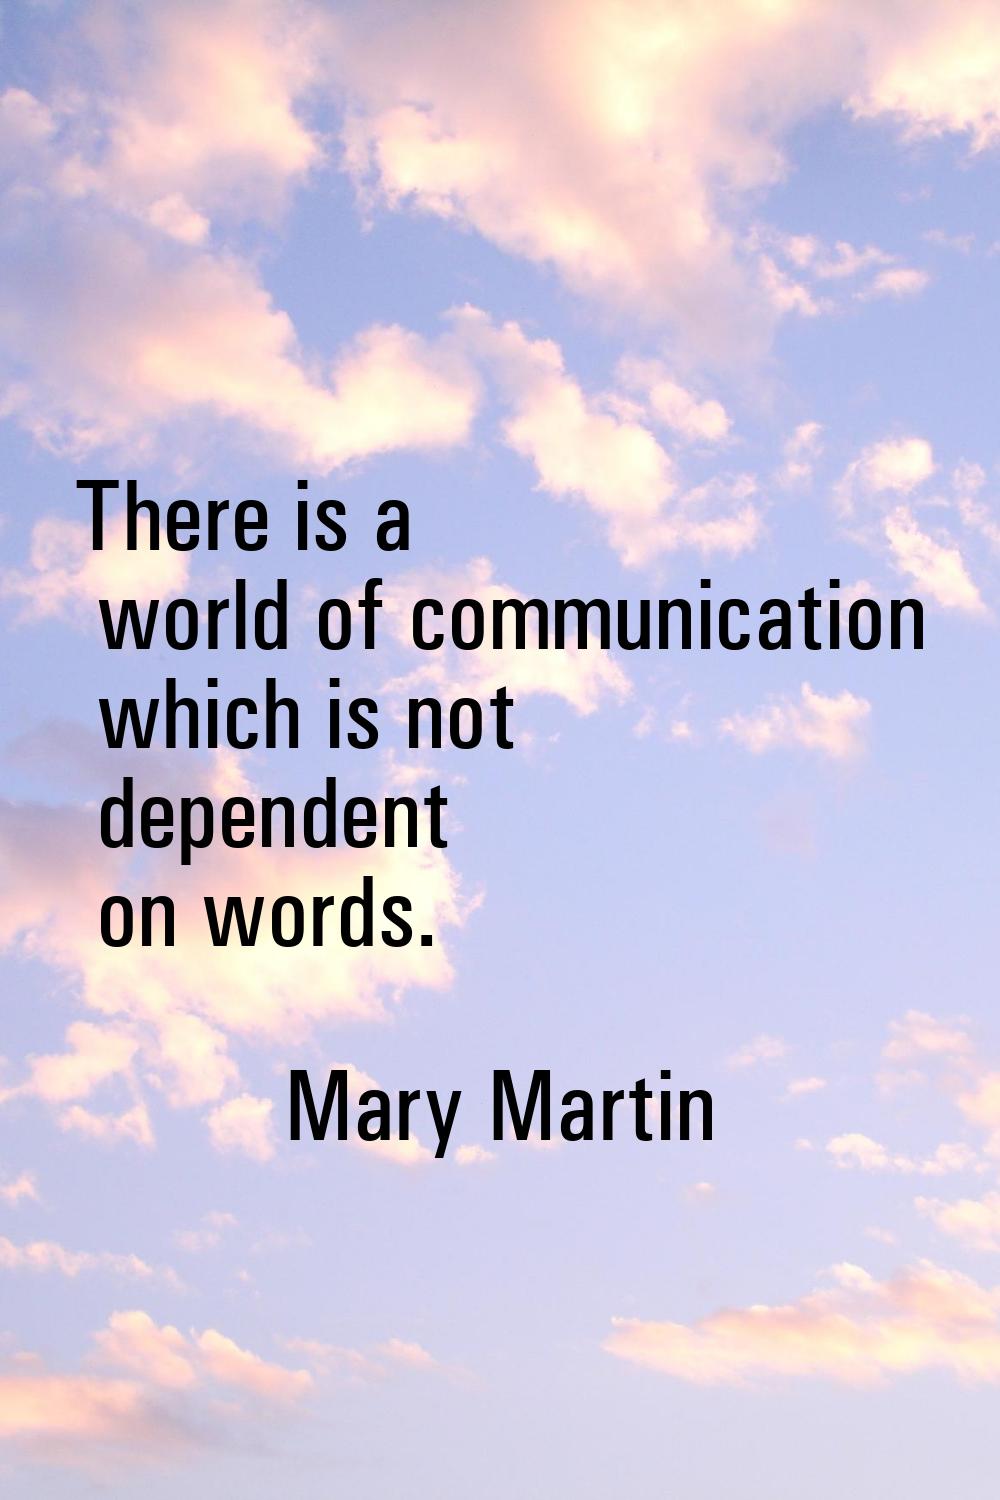 There is a world of communication which is not dependent on words.